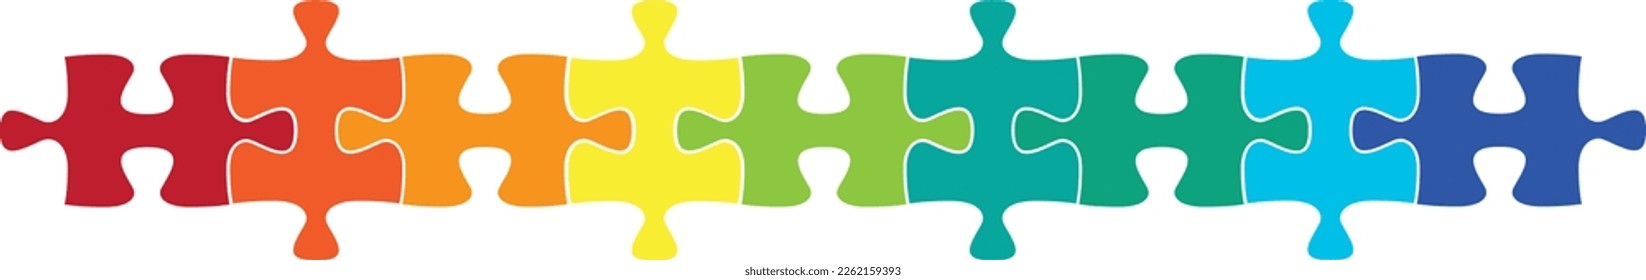 Puzzle pieces  rainbow gradient colored jigsaw puzzle pieces  twelve different colors in row  Isolated vector illustration white background 